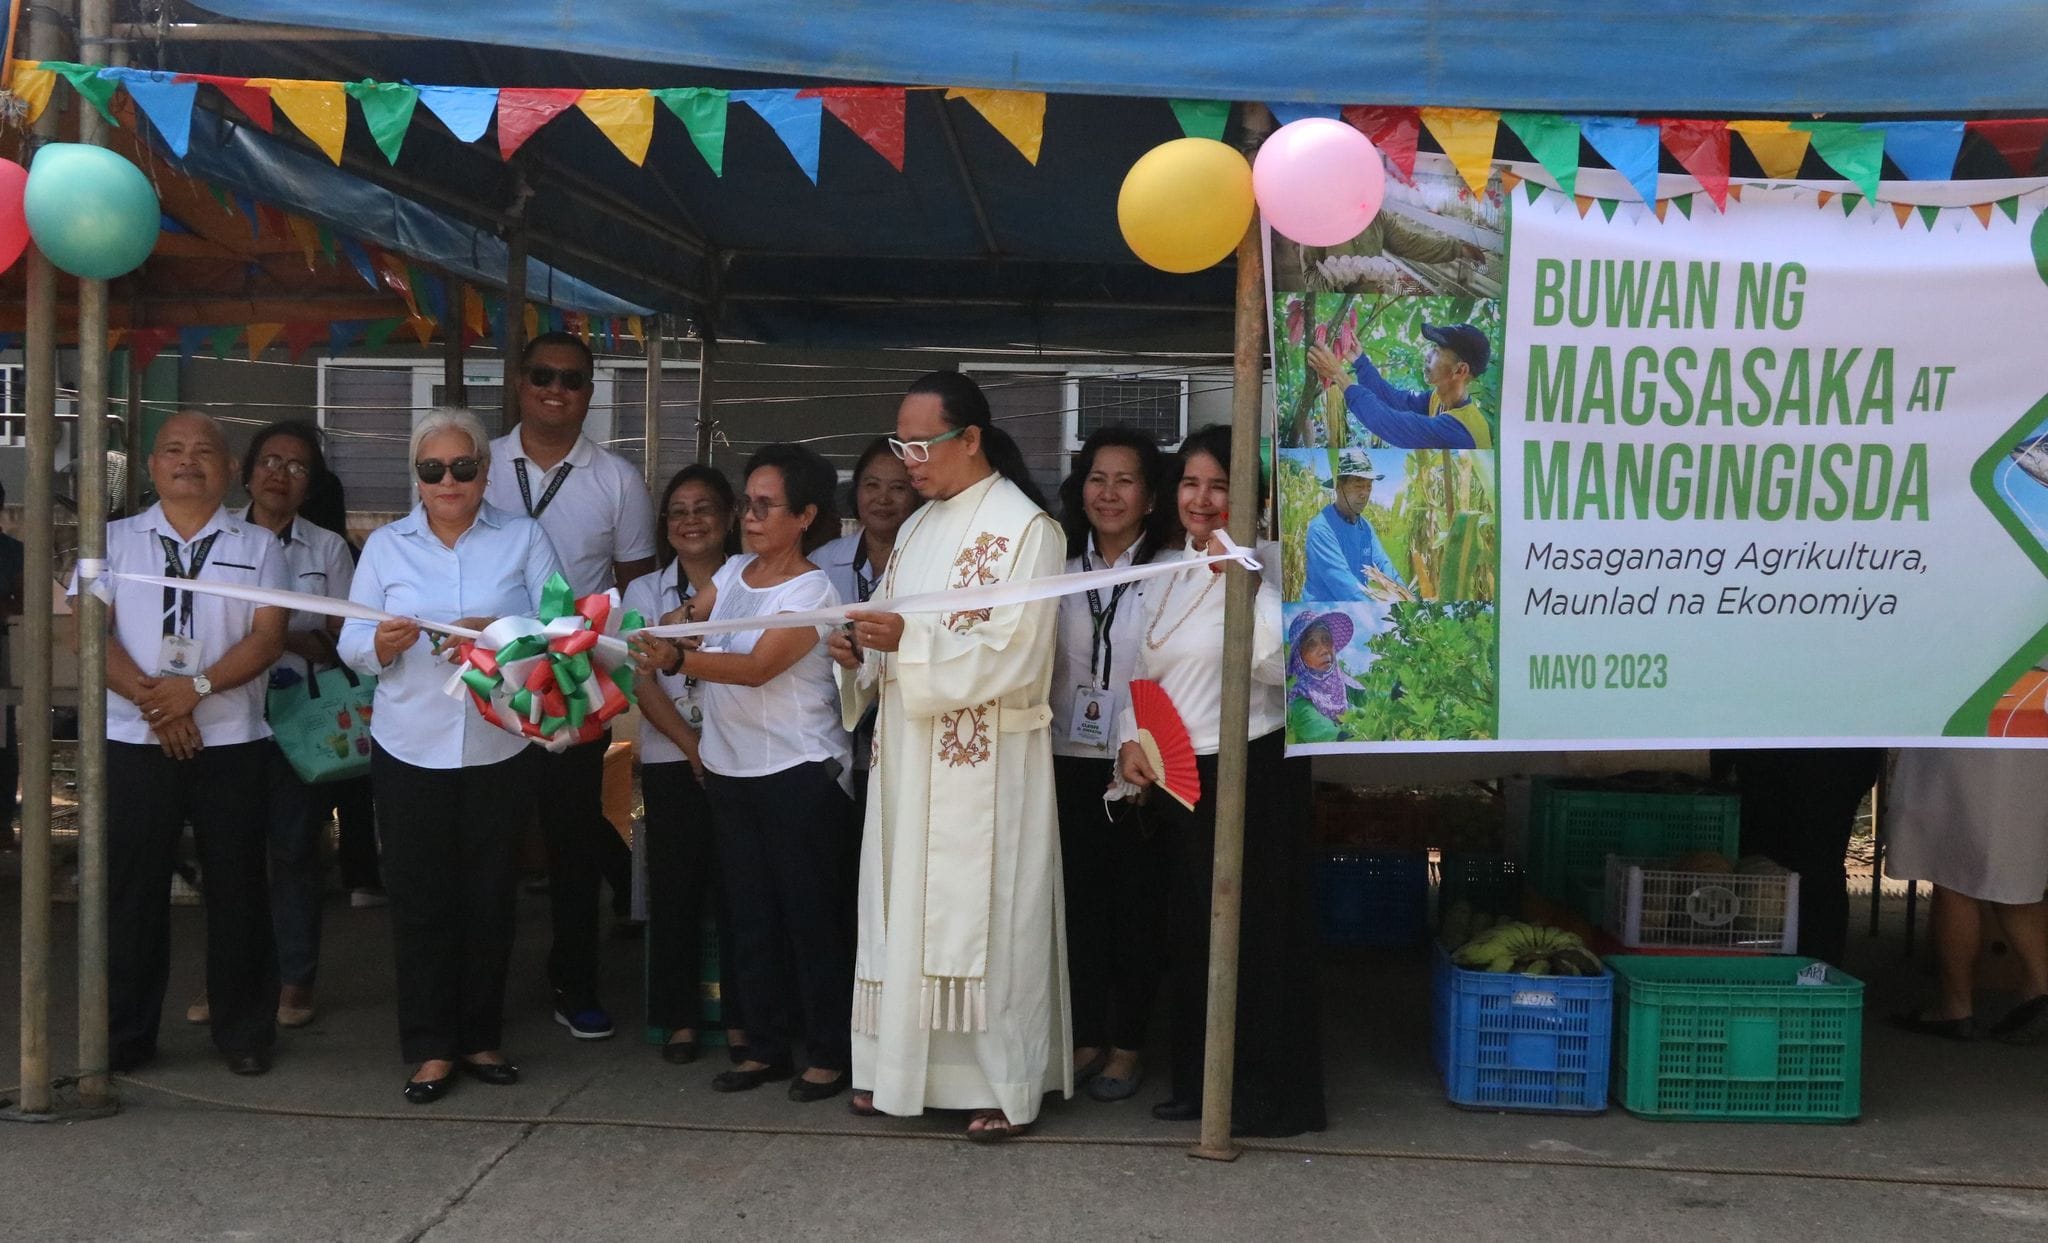 Aggie NorMin celebrates Farmers’, Fisherfolk’s Month, Feast Day of St. Isidore